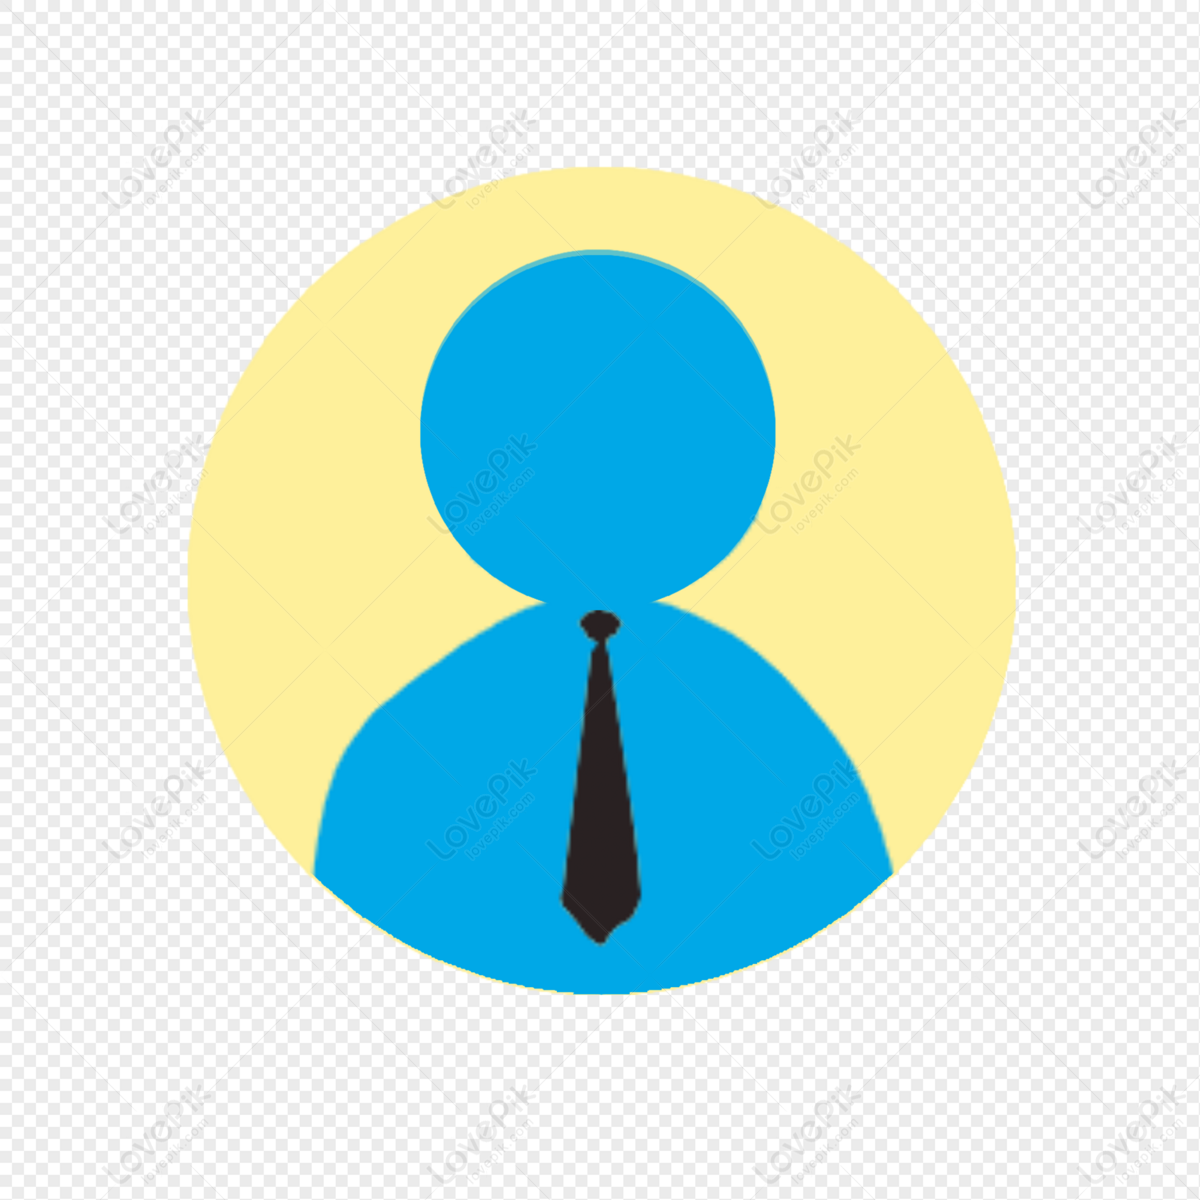 People avatar icon 11459669 PNG